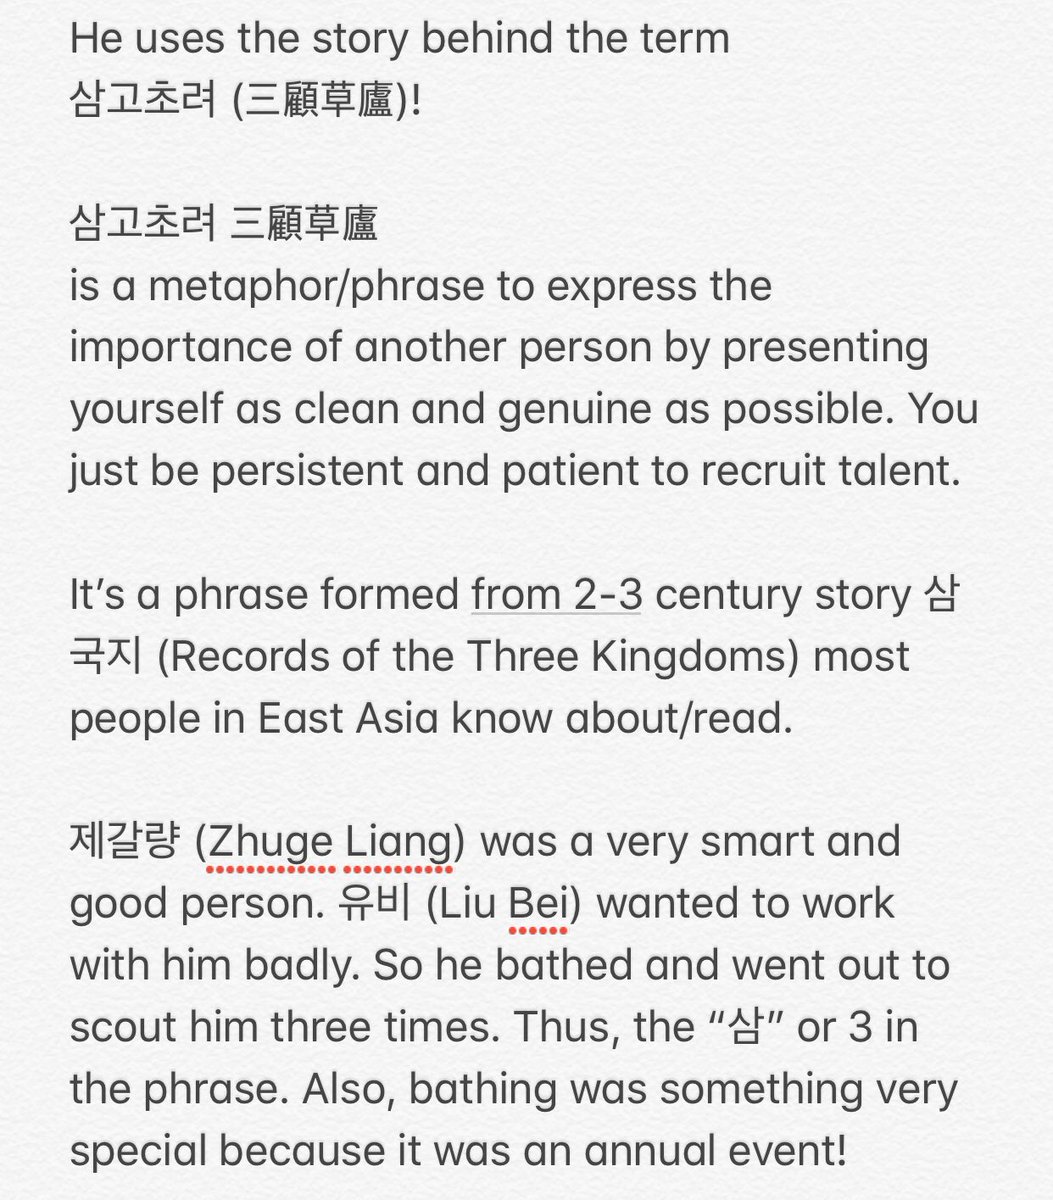 when he used the relationship between “Liu Bei” and “Zhuge Liang” from the book “The Romance of Three Kingdoms” as a metaphor of his relationship with armys, displaying his vast knowledge.